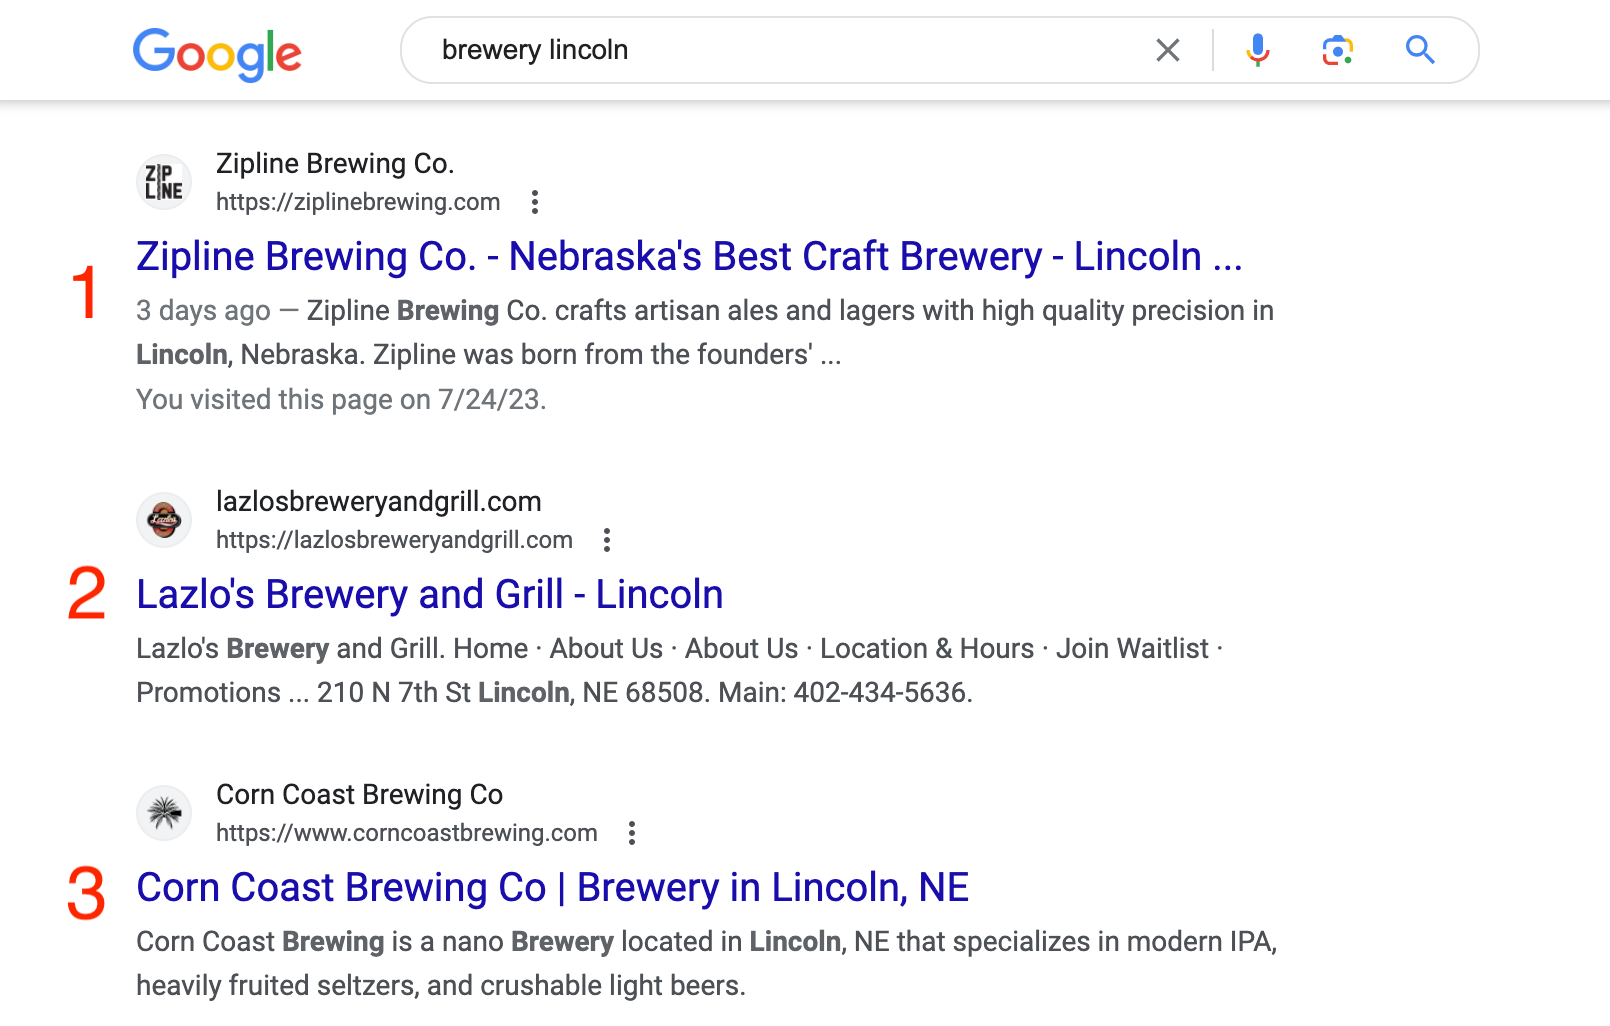 Search results for "brewery Lincoln" with the first three results numbered